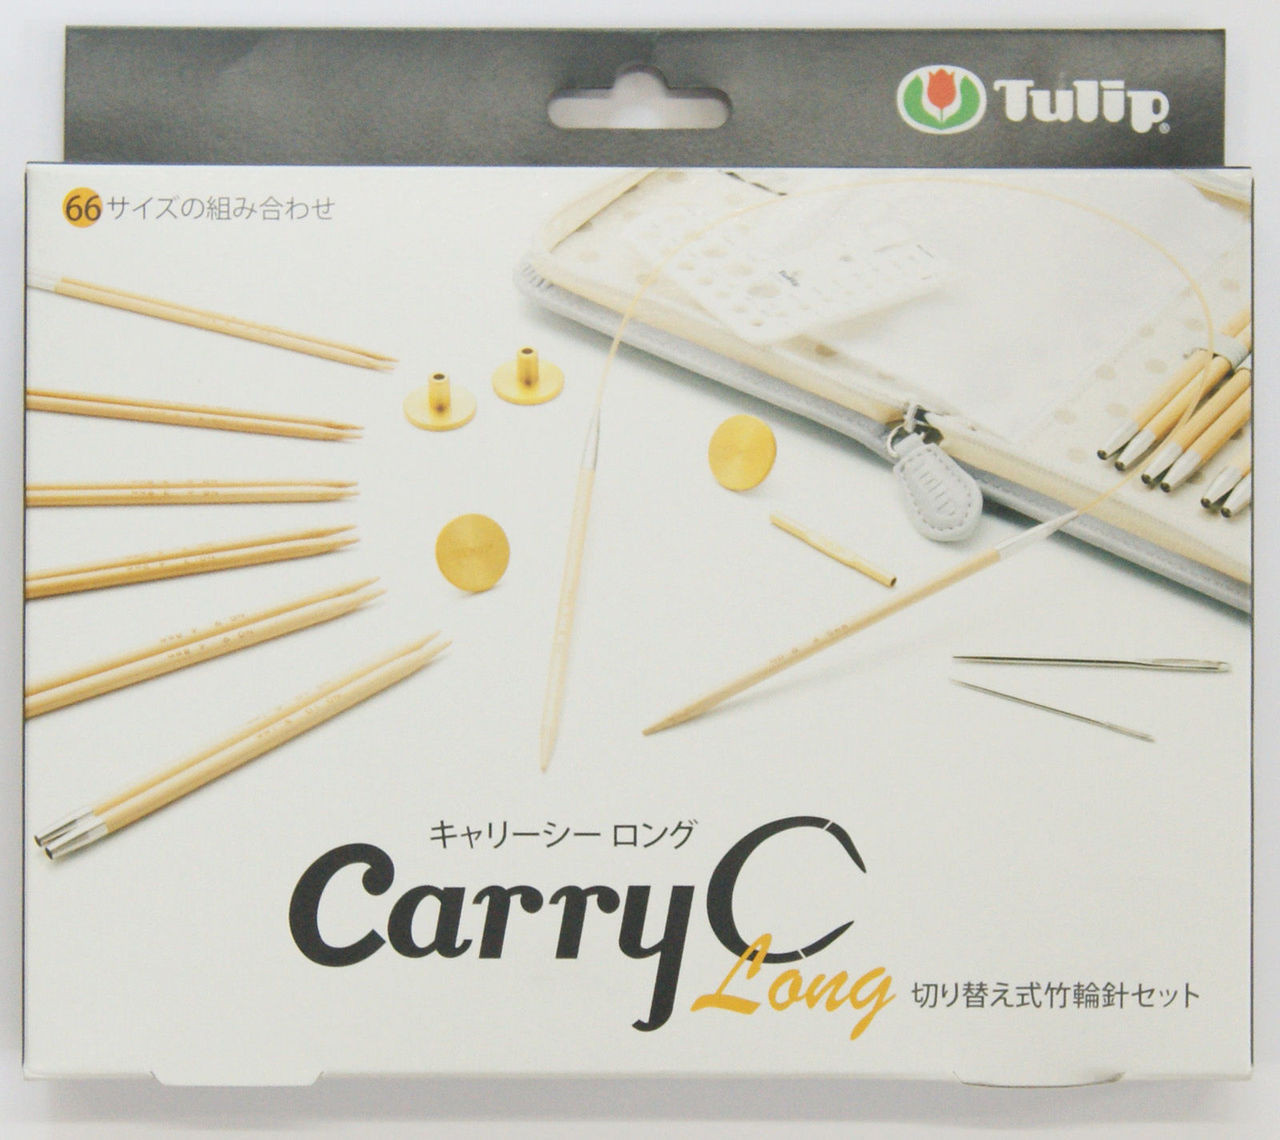 Tulip Carry C Long 切り替え式竹輪針セット - その他